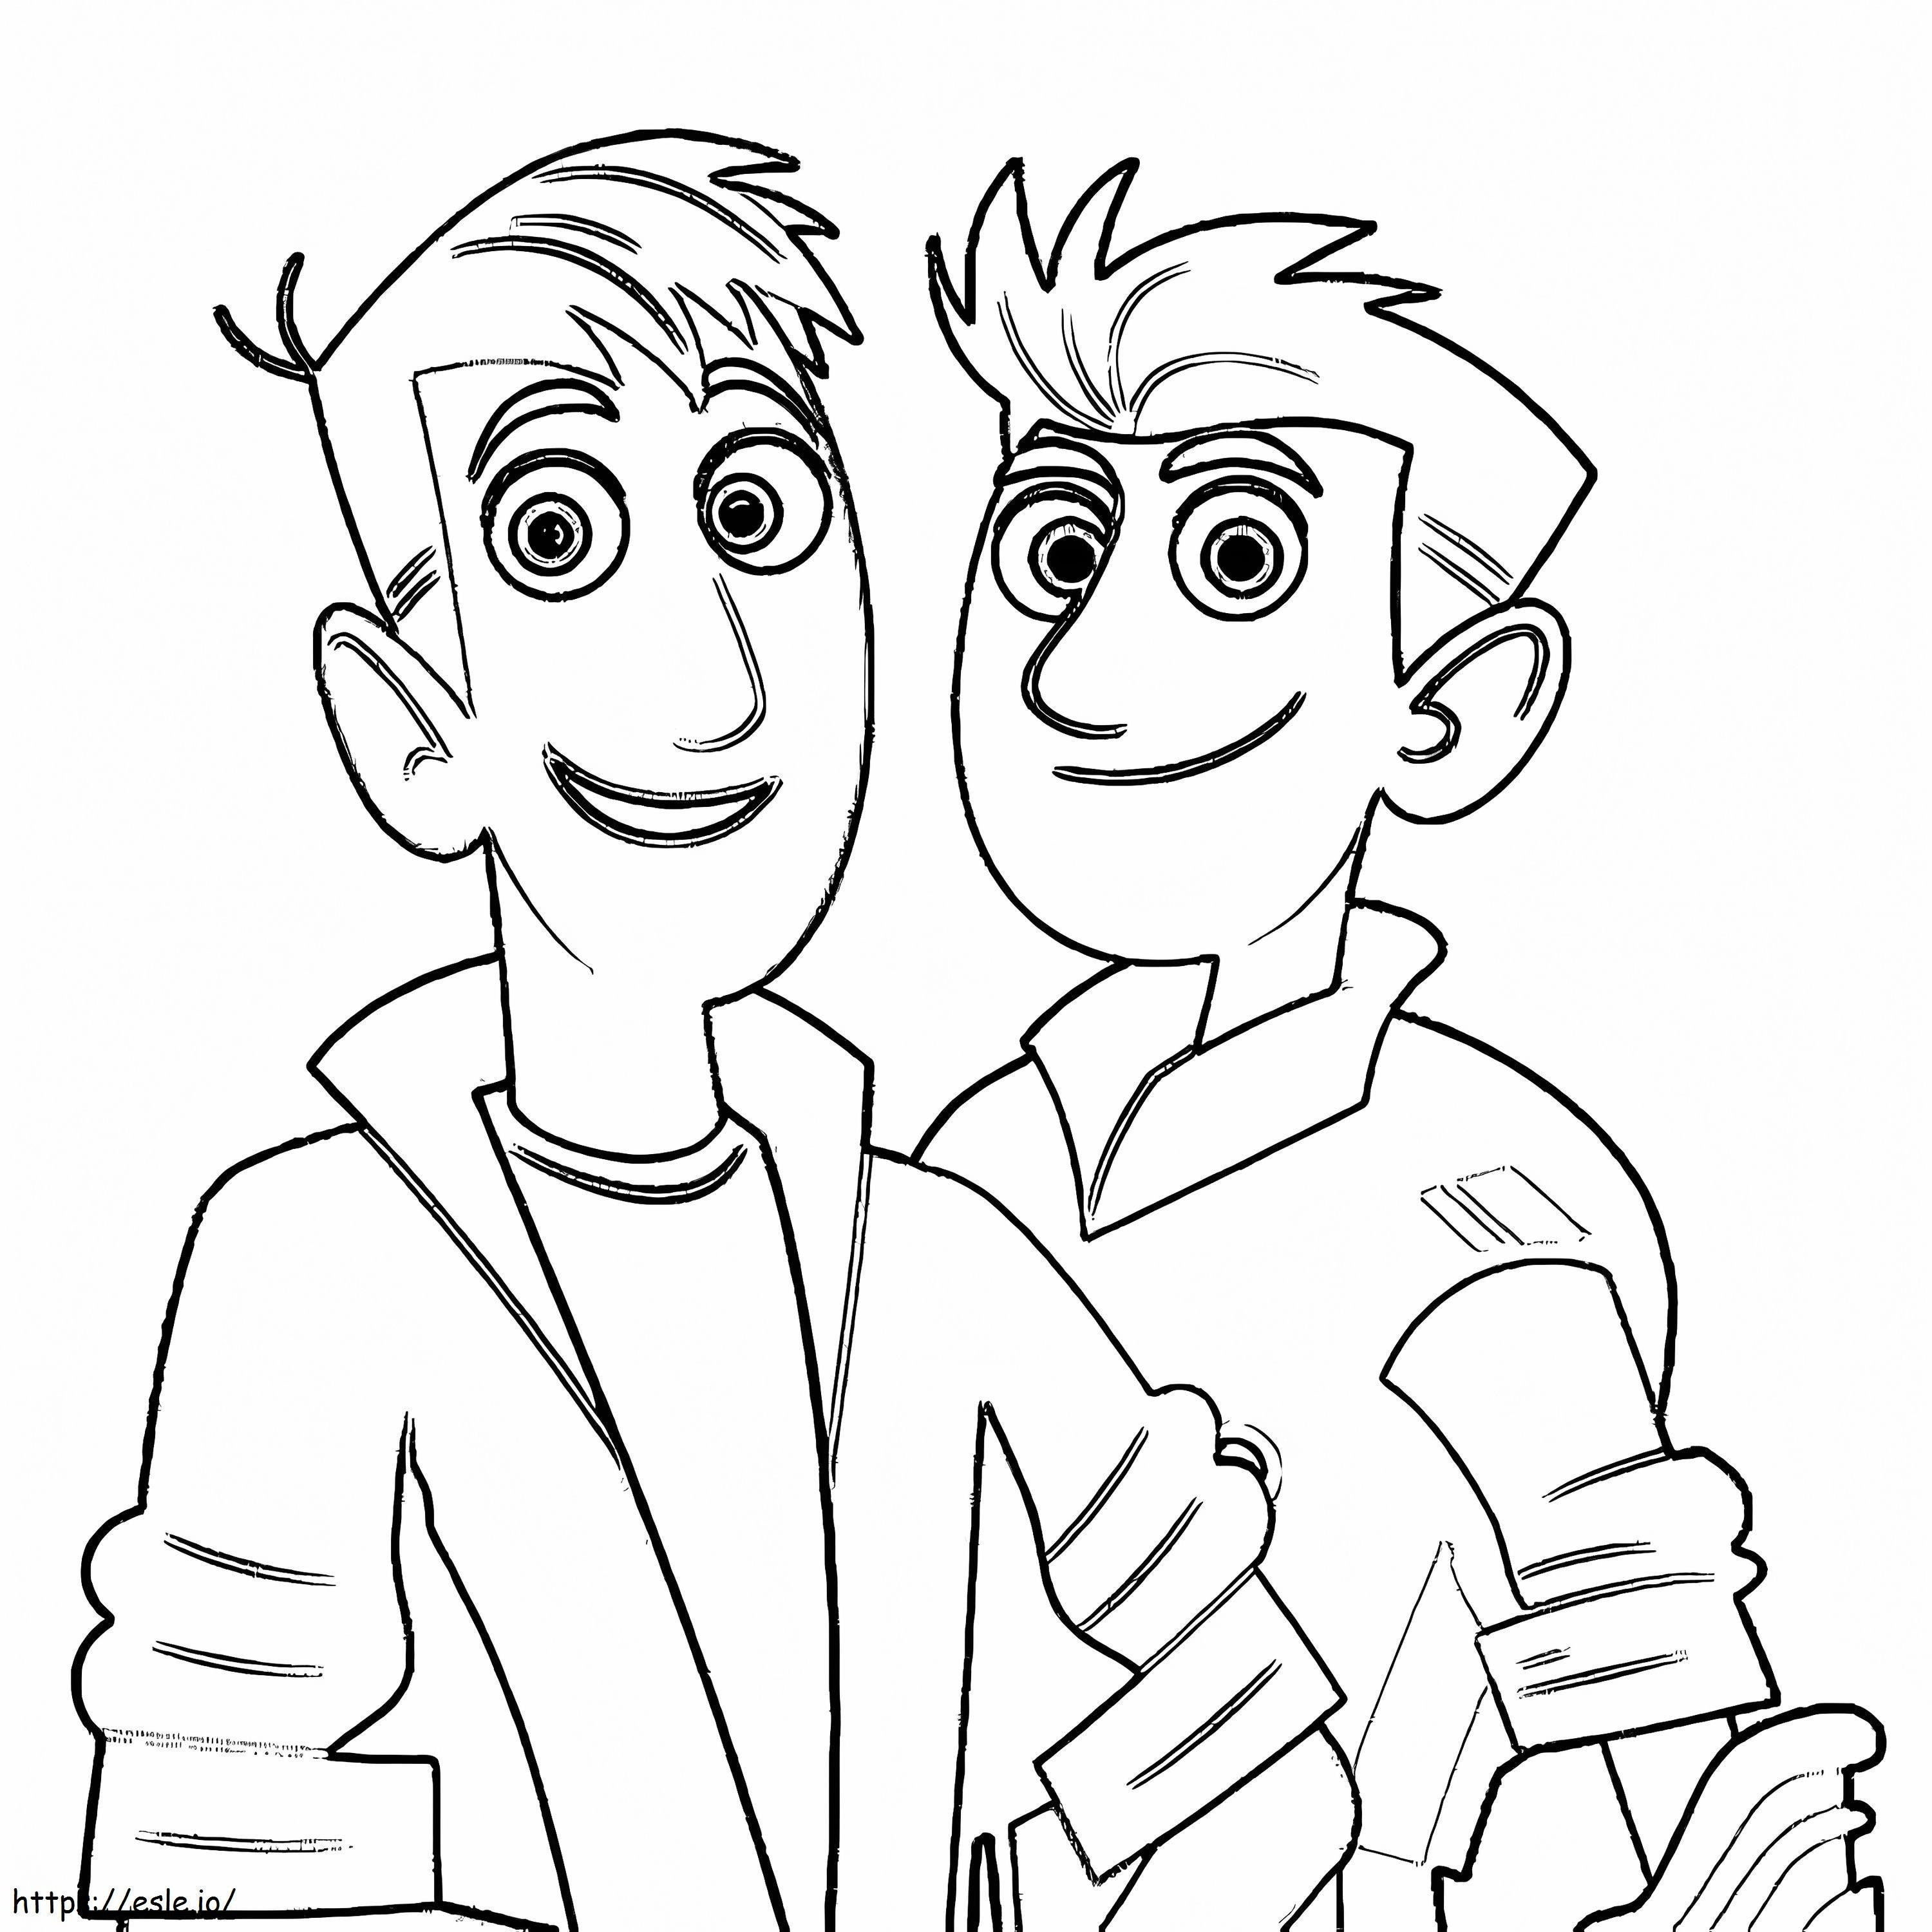 Wild Kratts 2 coloring page